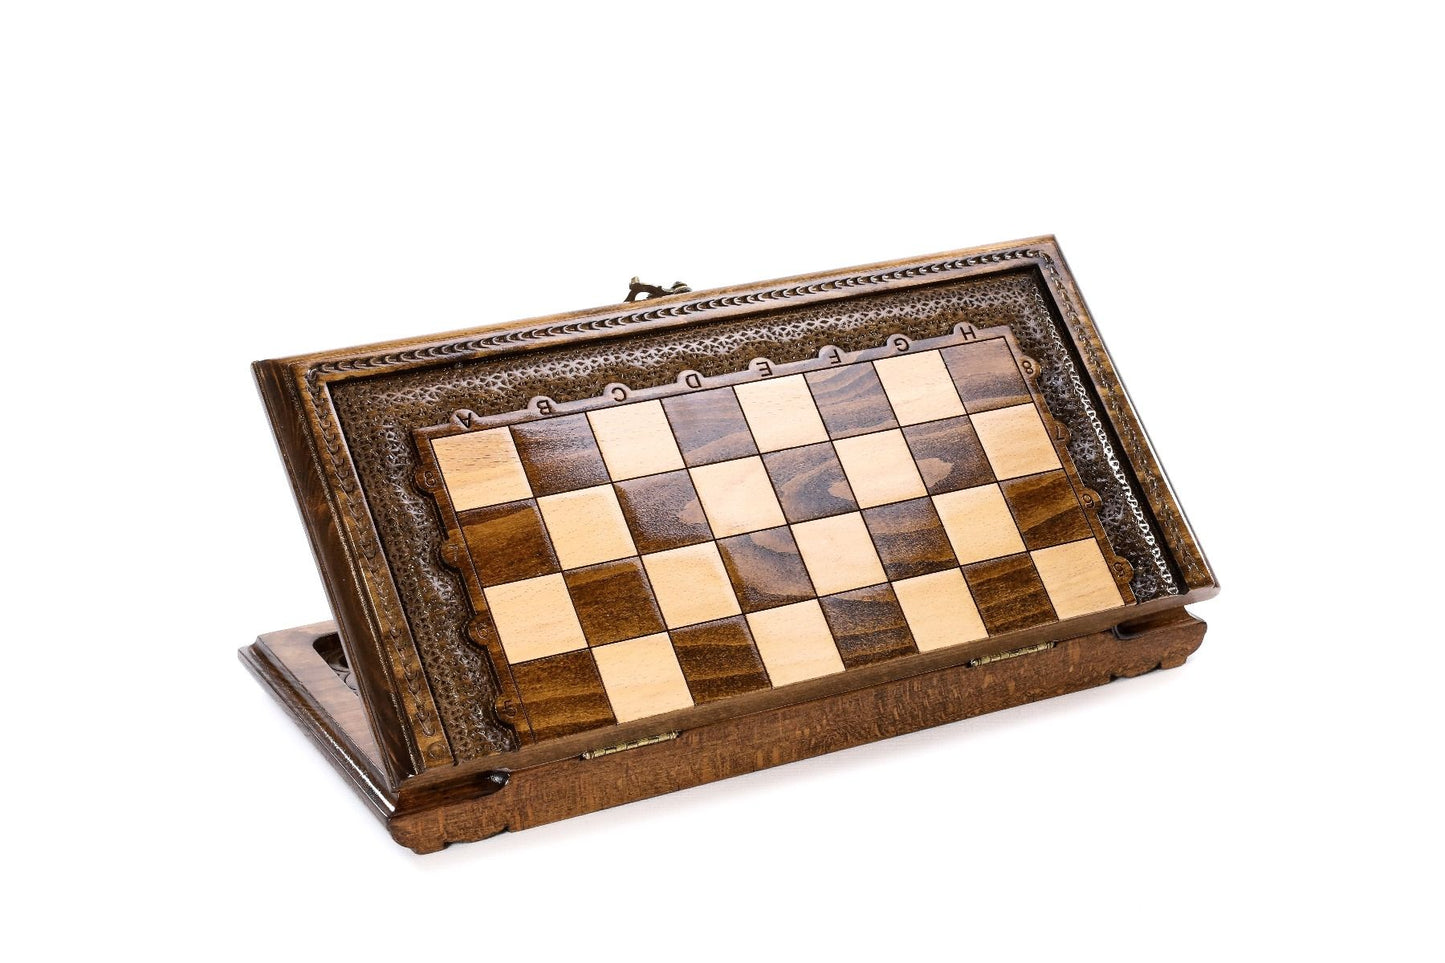 Dive into classic strategy with a unique, artisan-crafted set, where chess and backgammon unite in exquisite carved detail.